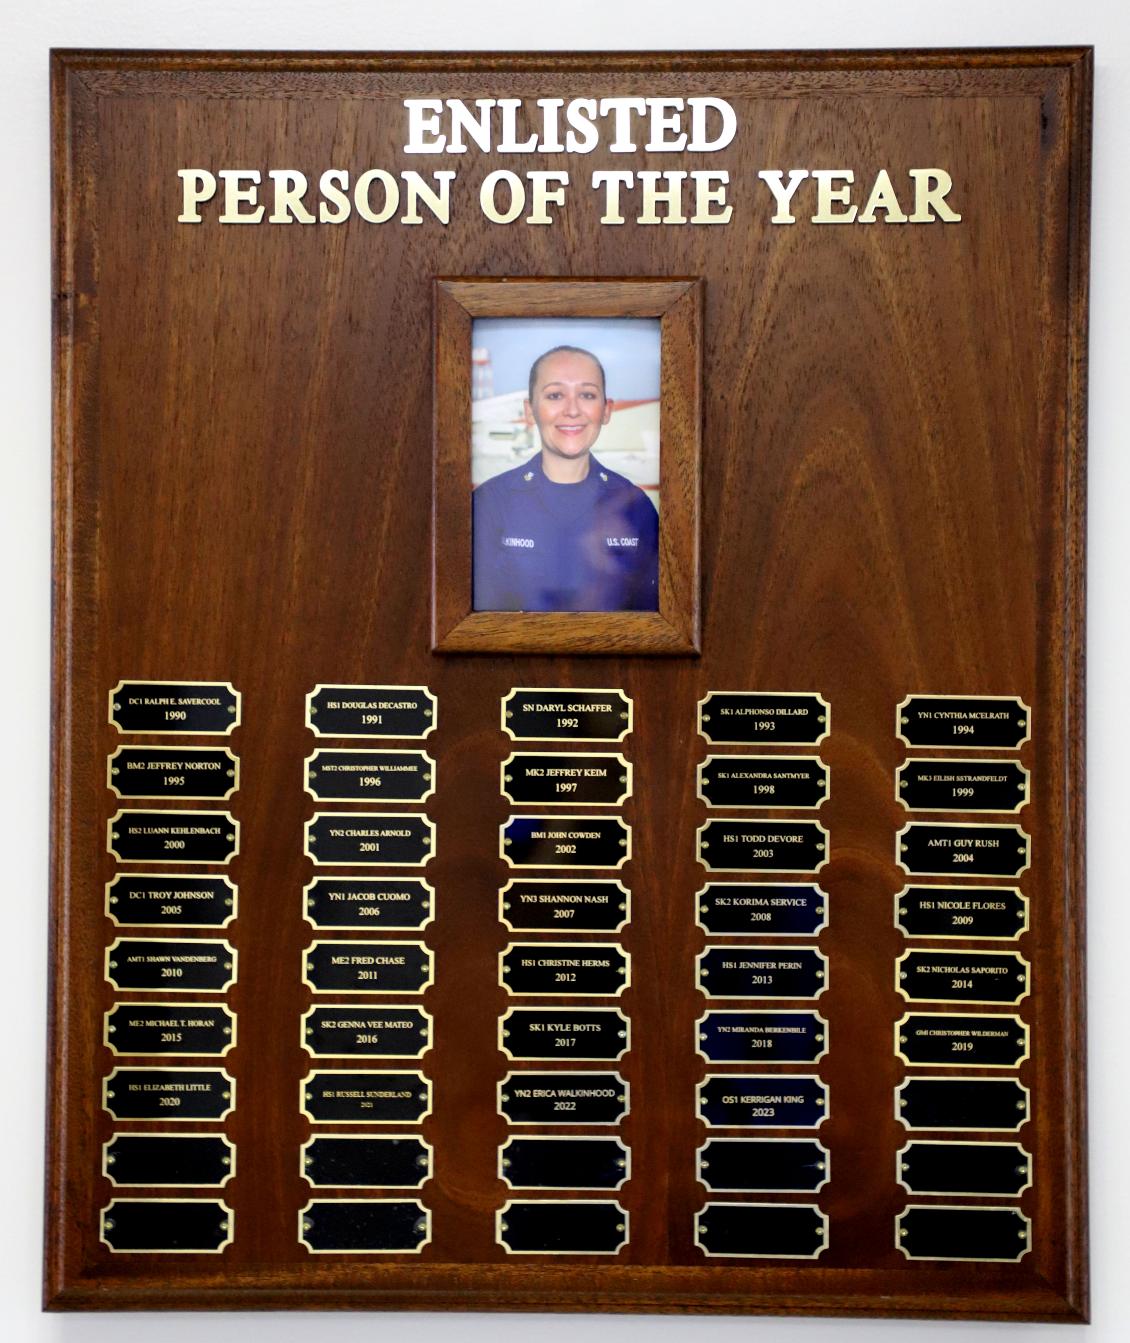 Cape May Coast Guard Training Center - Enlisted Person of the Year